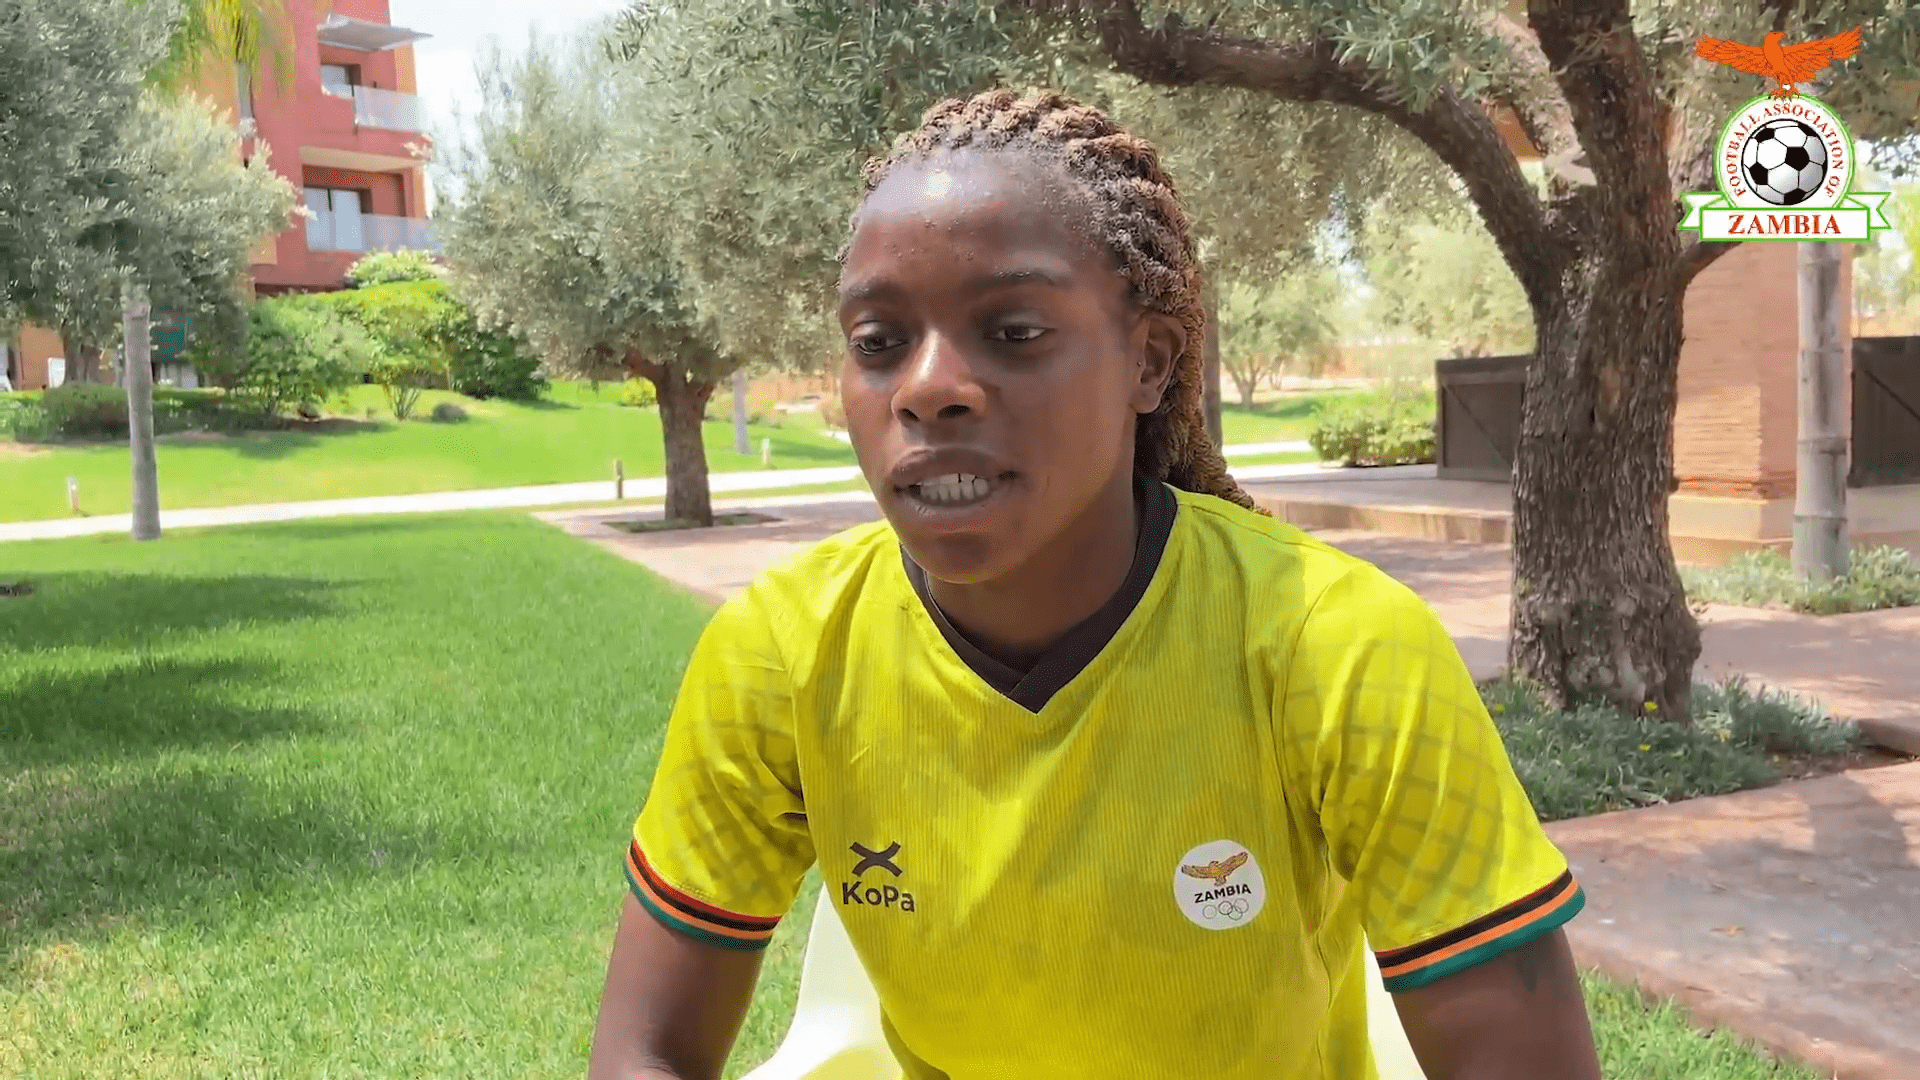 The game against Cameroon is a must win for us -Hazel Nali